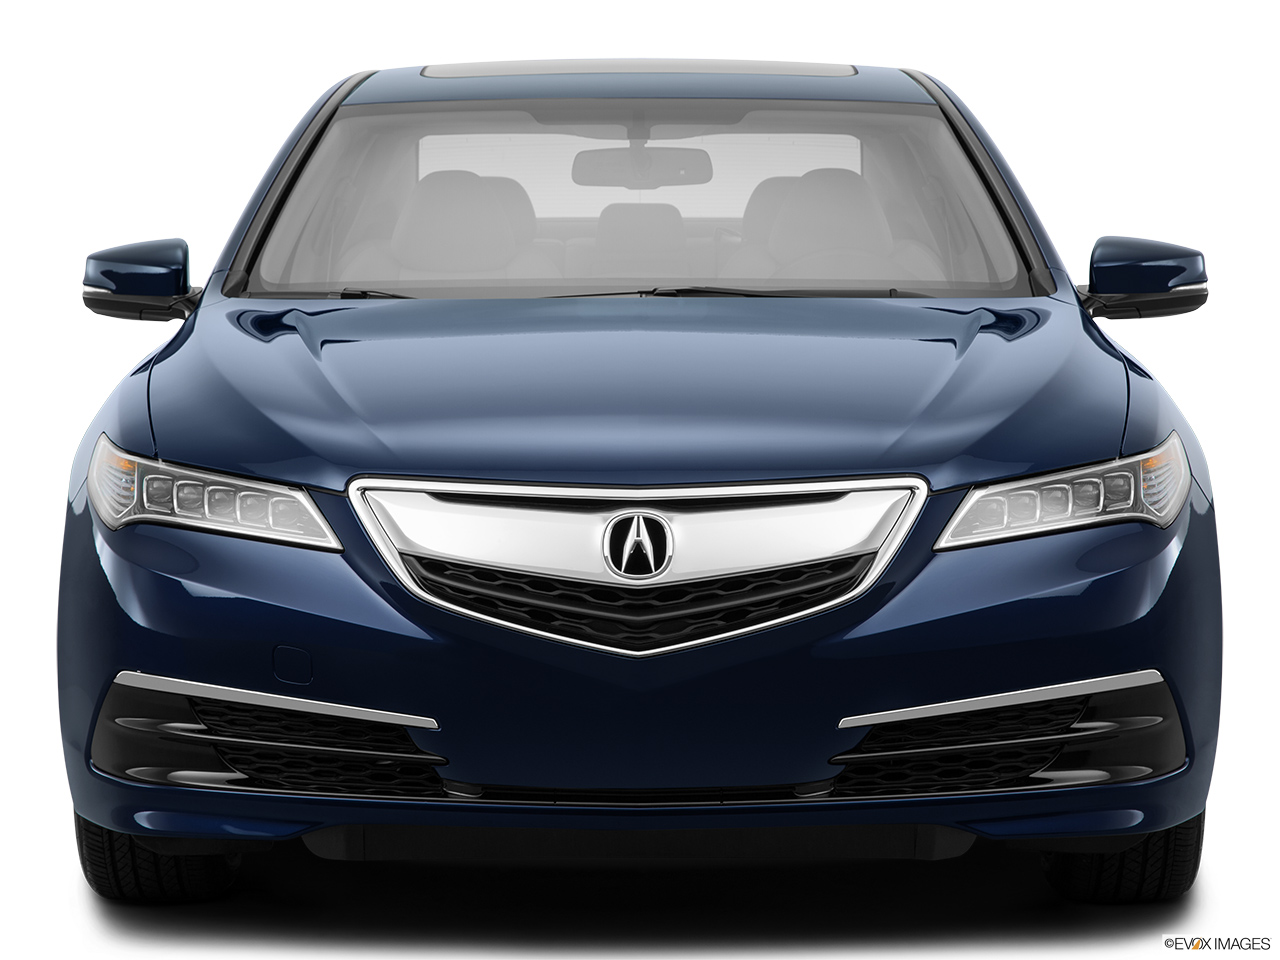 2015 Acura TLX 3.5 V-6 9-AT P-AWS Low/wide front. 